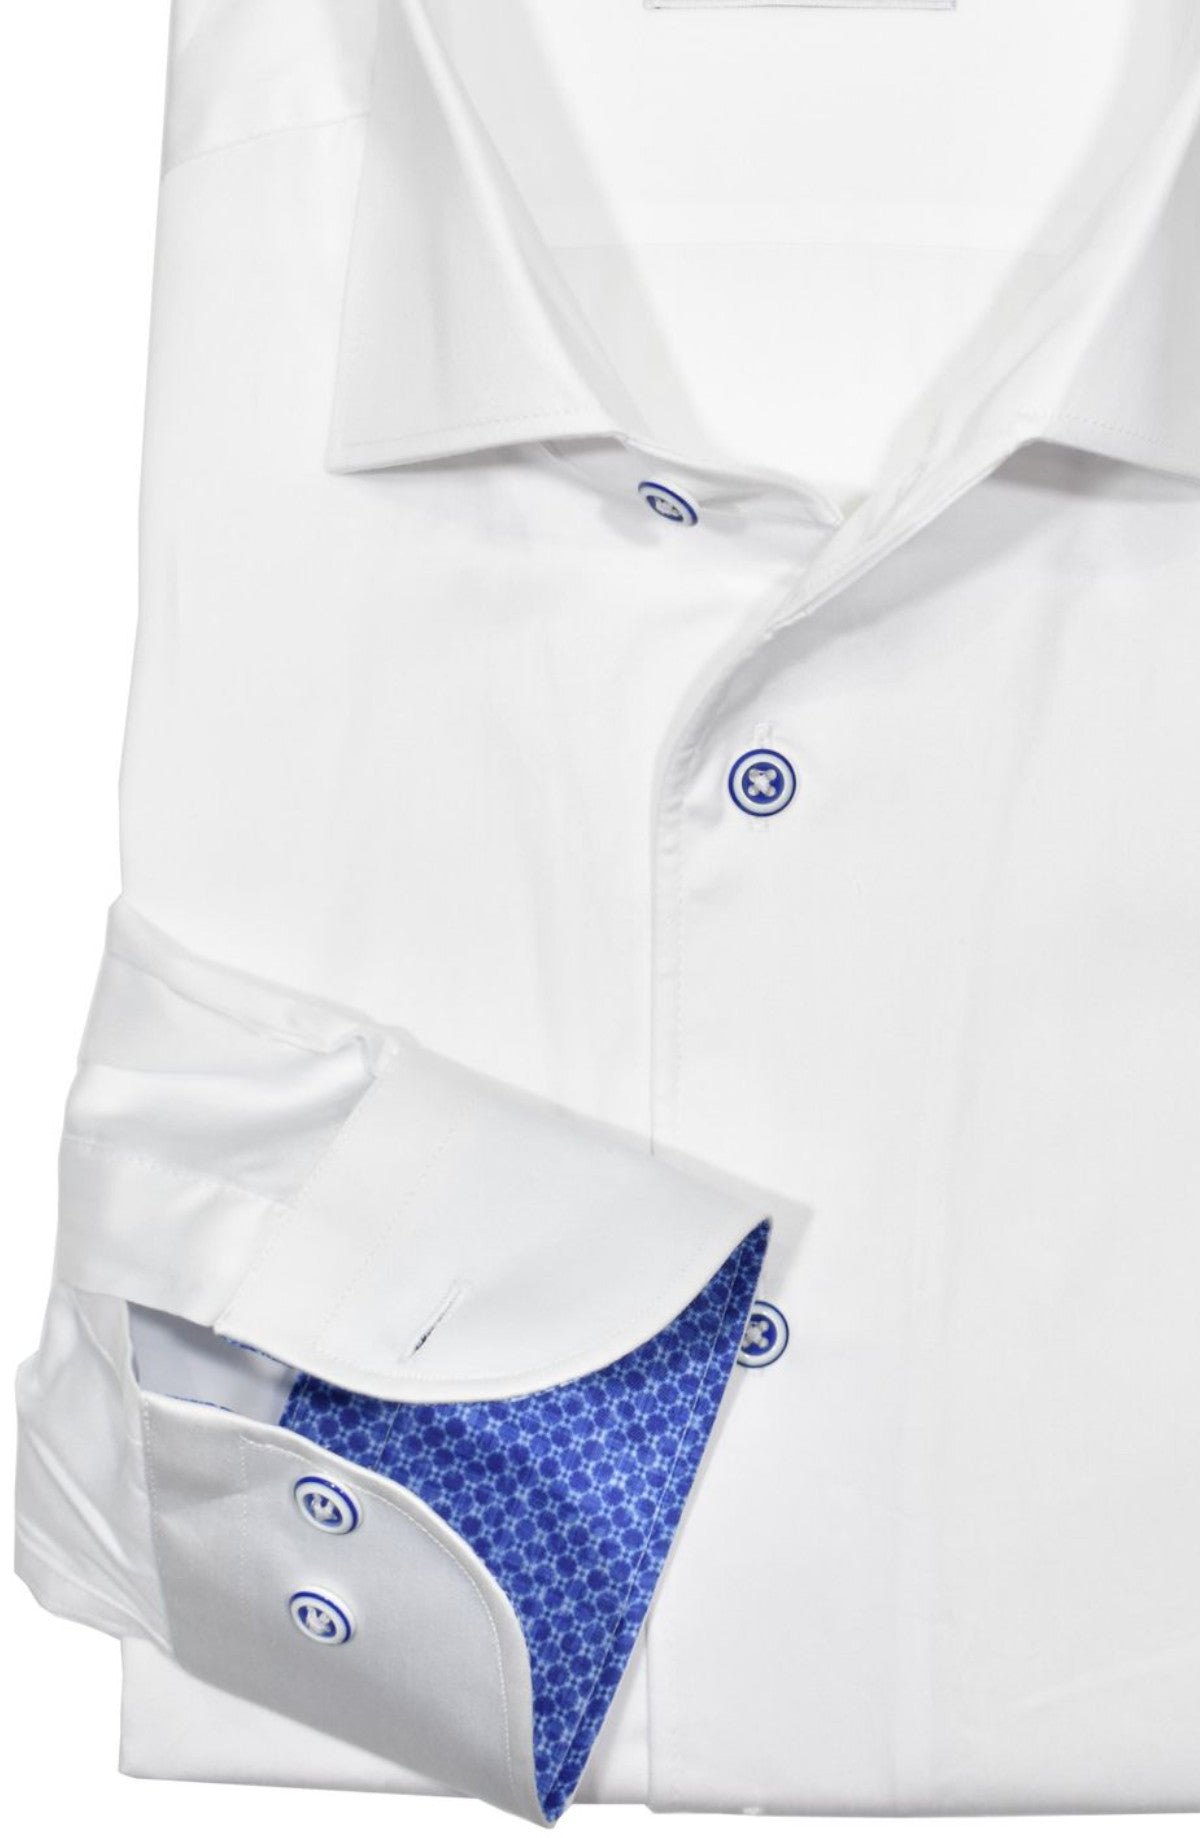 The Marcello Sport 1 piece roll collar is a must have in classic solid colors.  The collar stands perfectly tall and the upper placket does not curl.  A solid shirt goes with absolutely anything and everything and feels great when it is all cotton and a silk sateen finish.